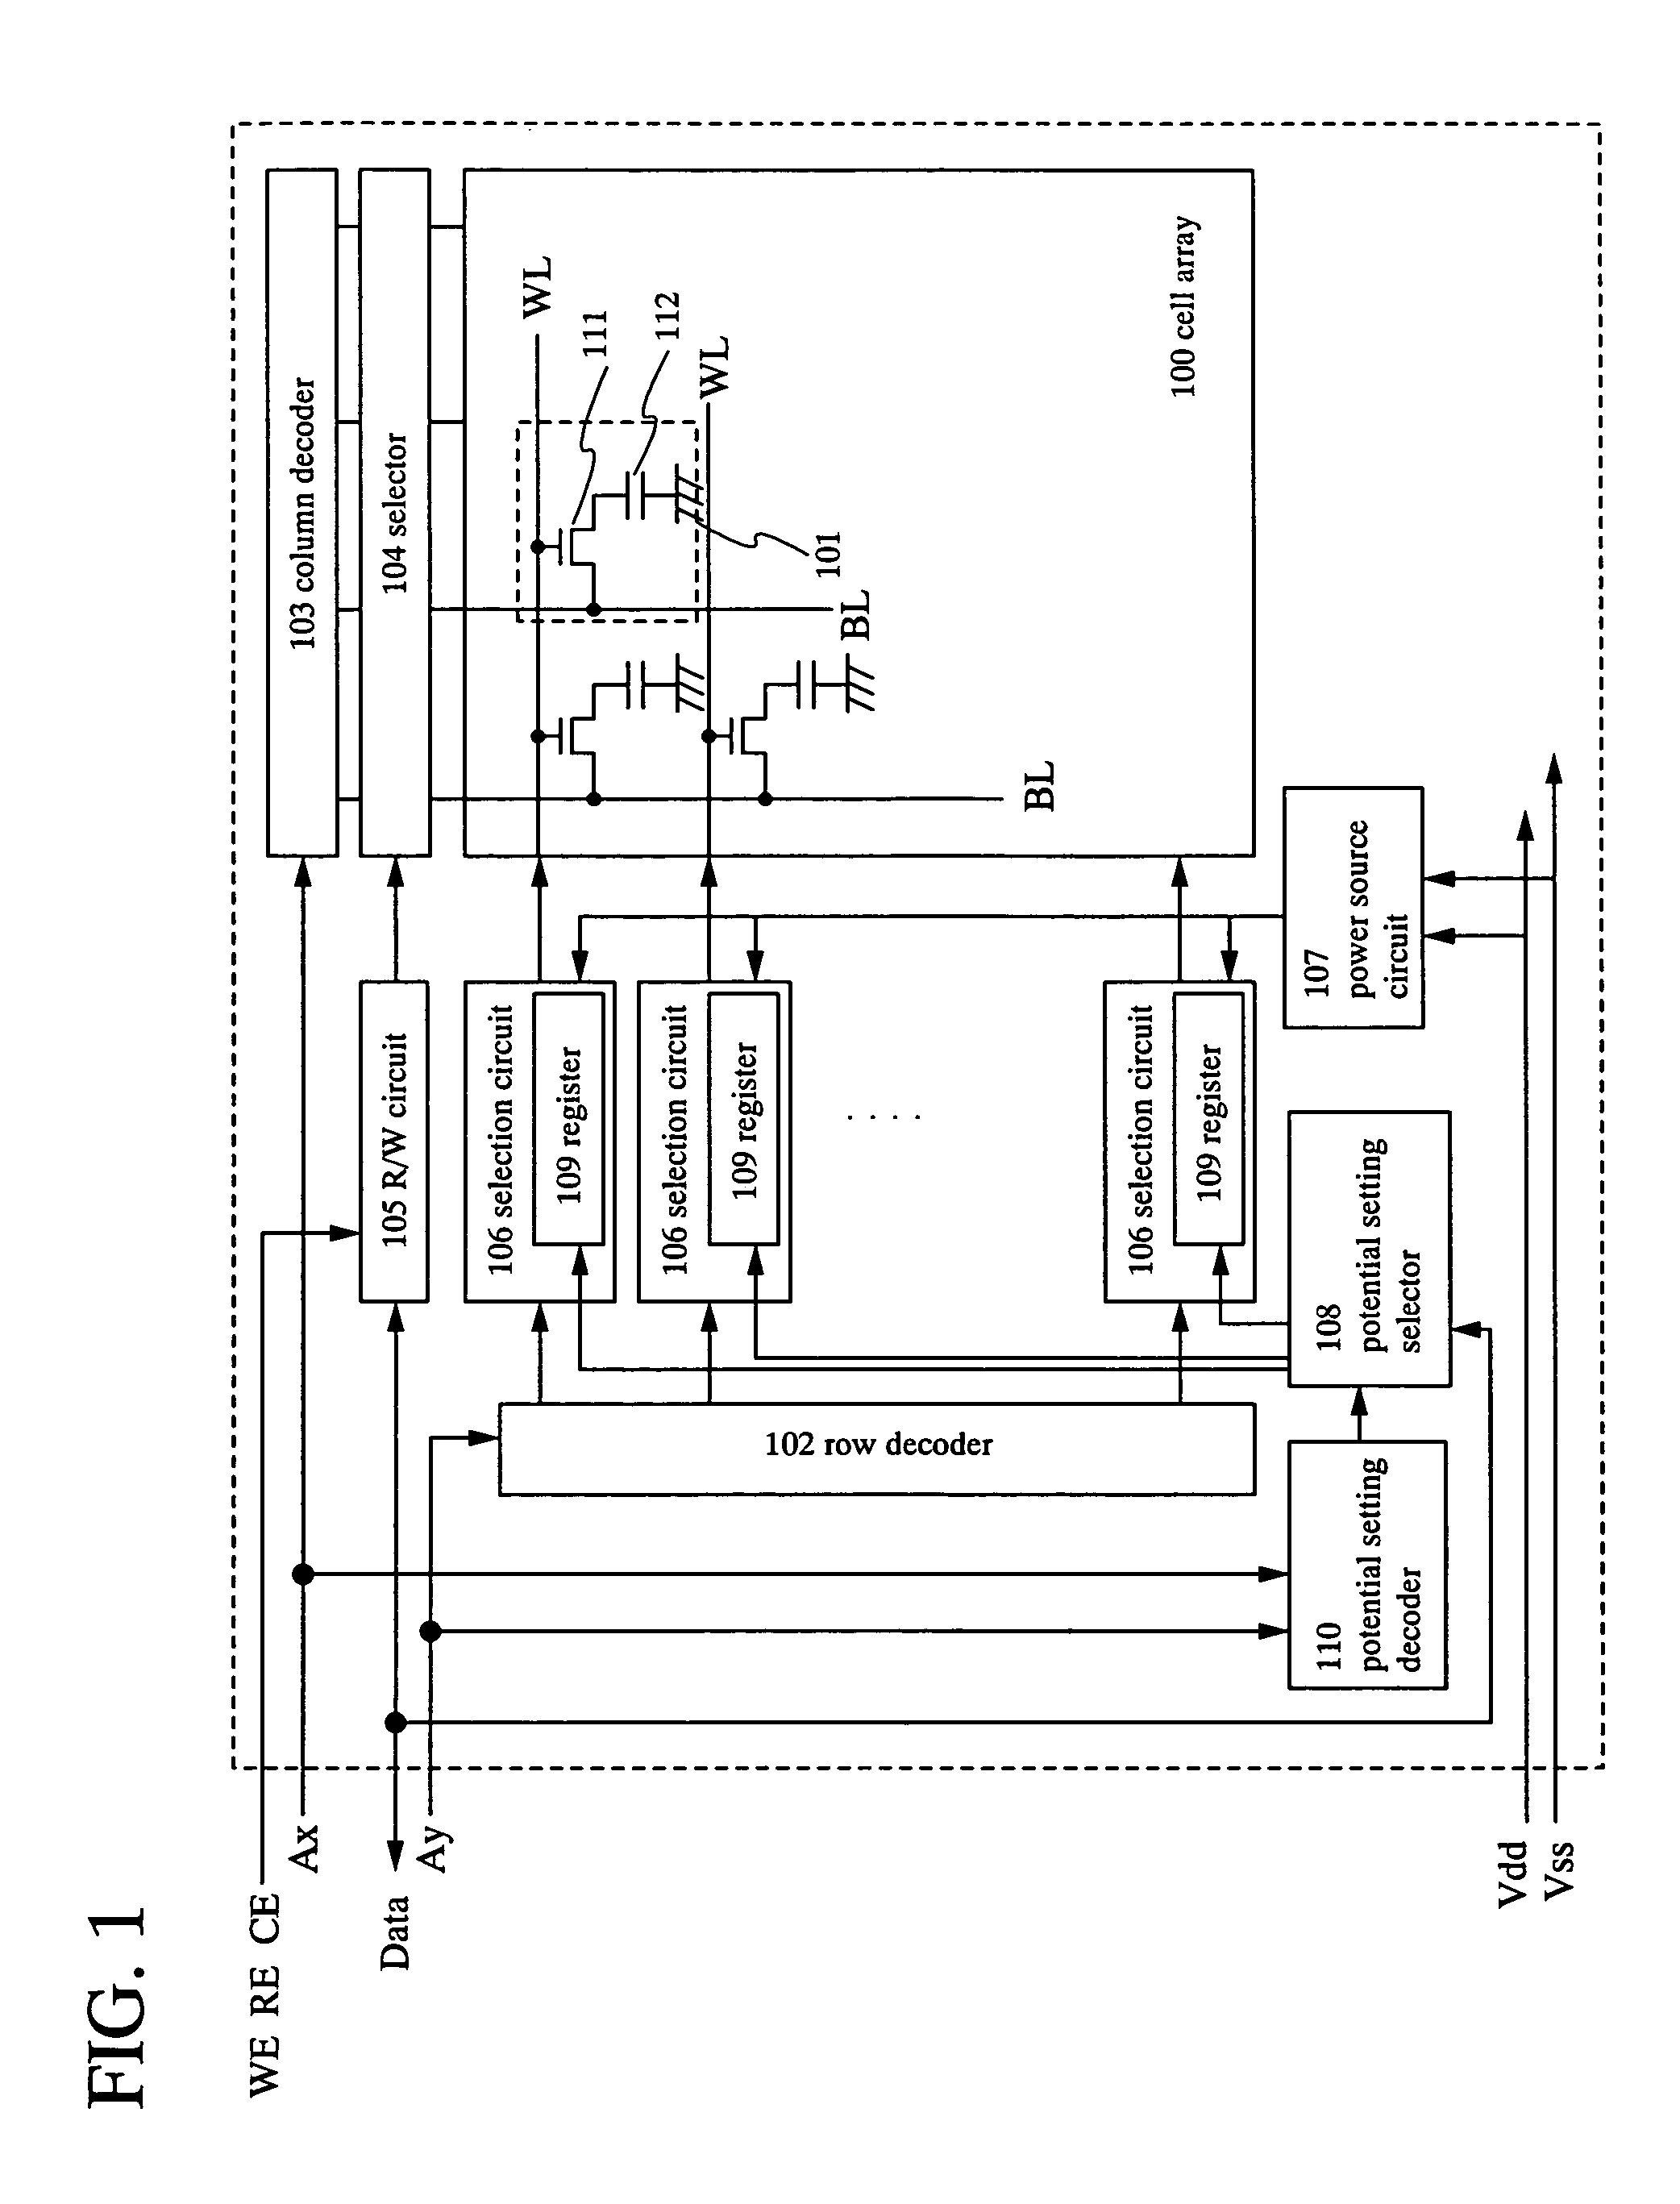 Memory unit and semiconductor device